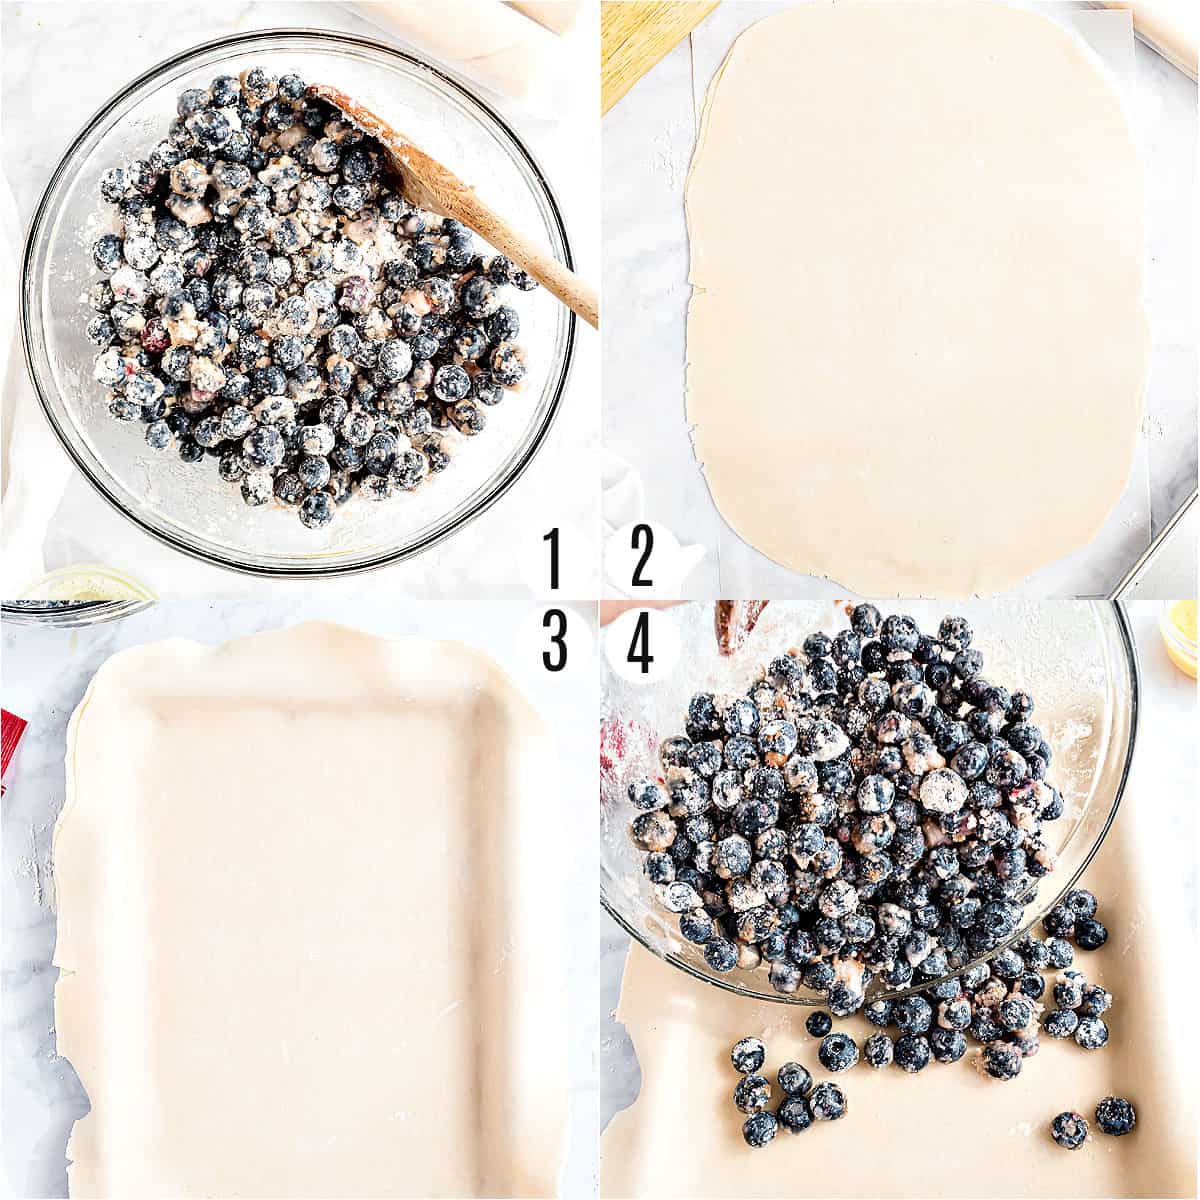 Step by step photos showing how to make blueberry pie filling.